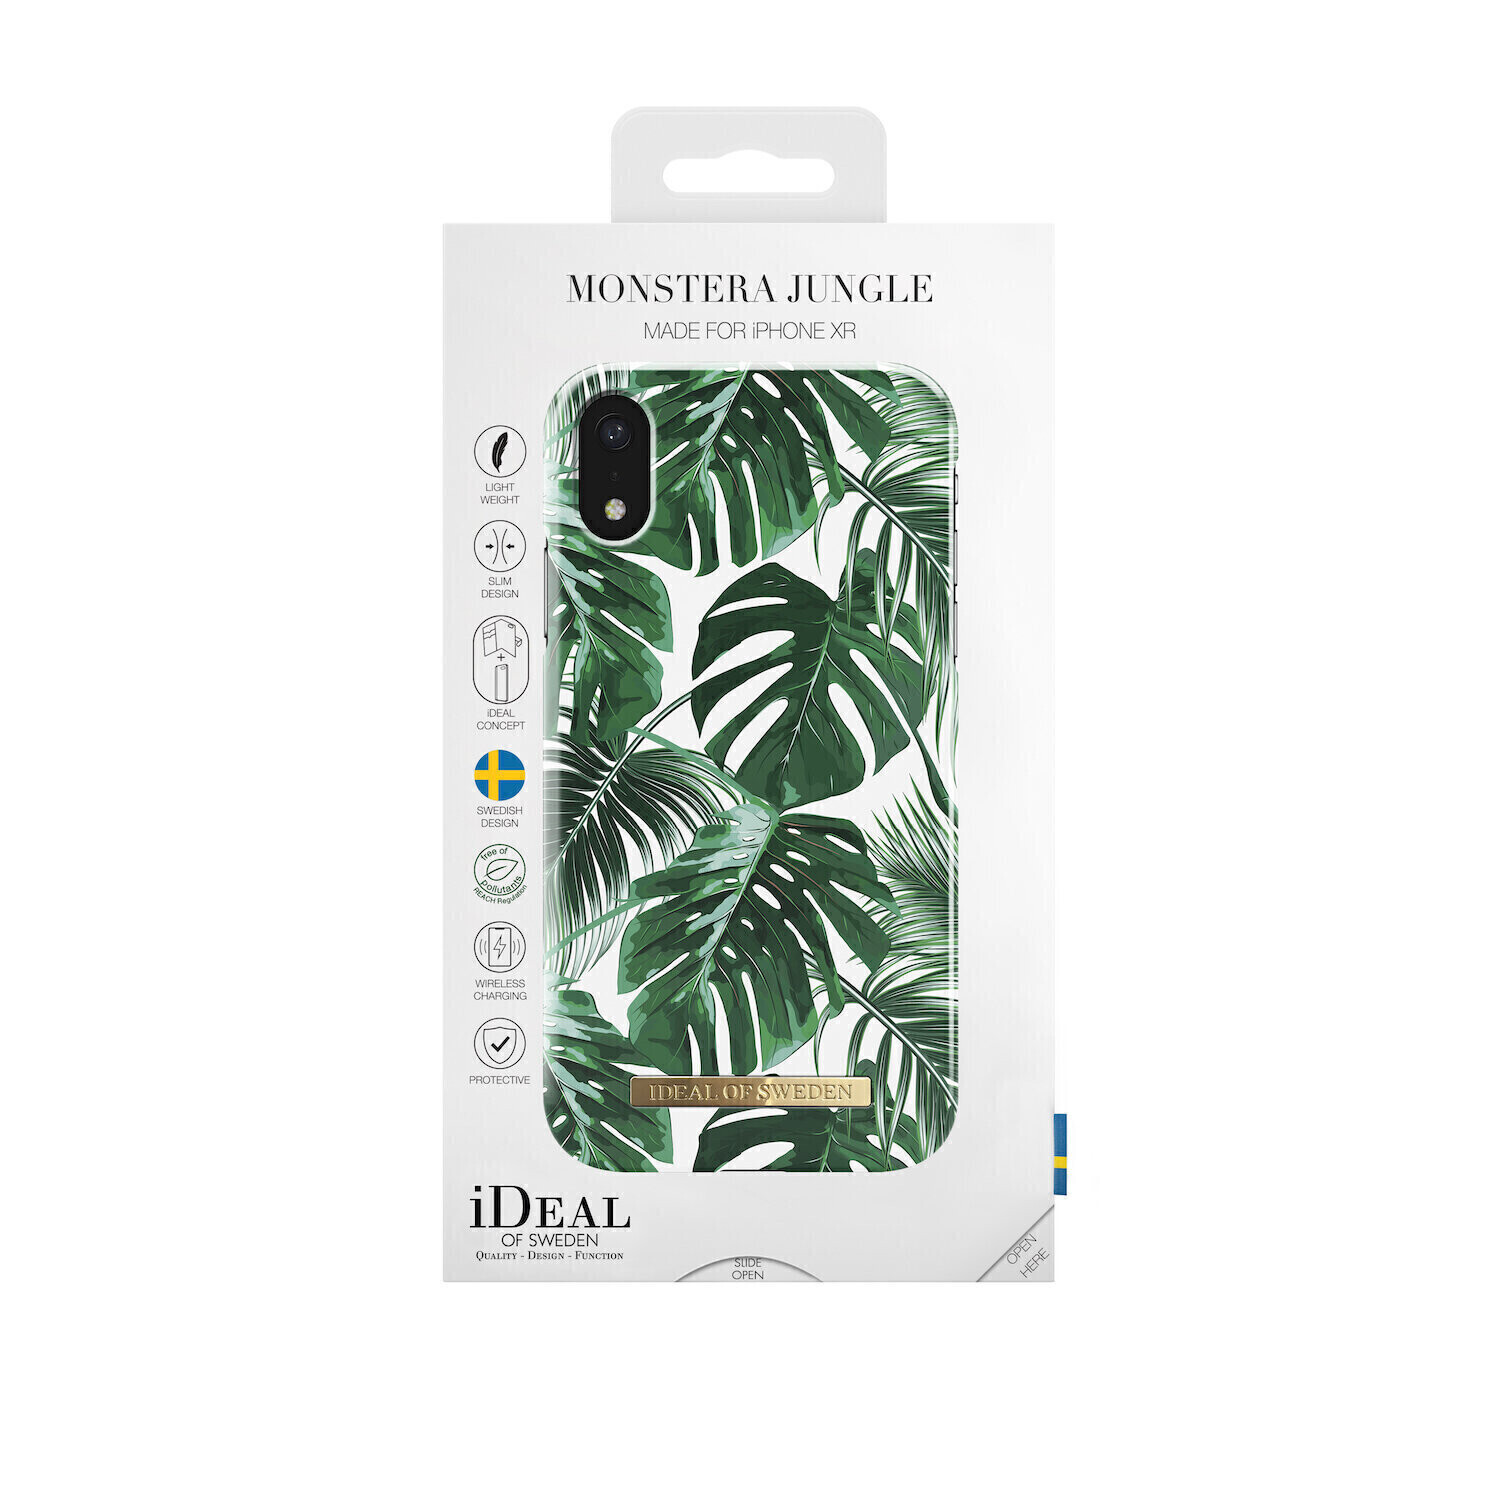 iDeal Of Sweden iPhone XR Fashion Case S/S 2017, Monstera Jungle